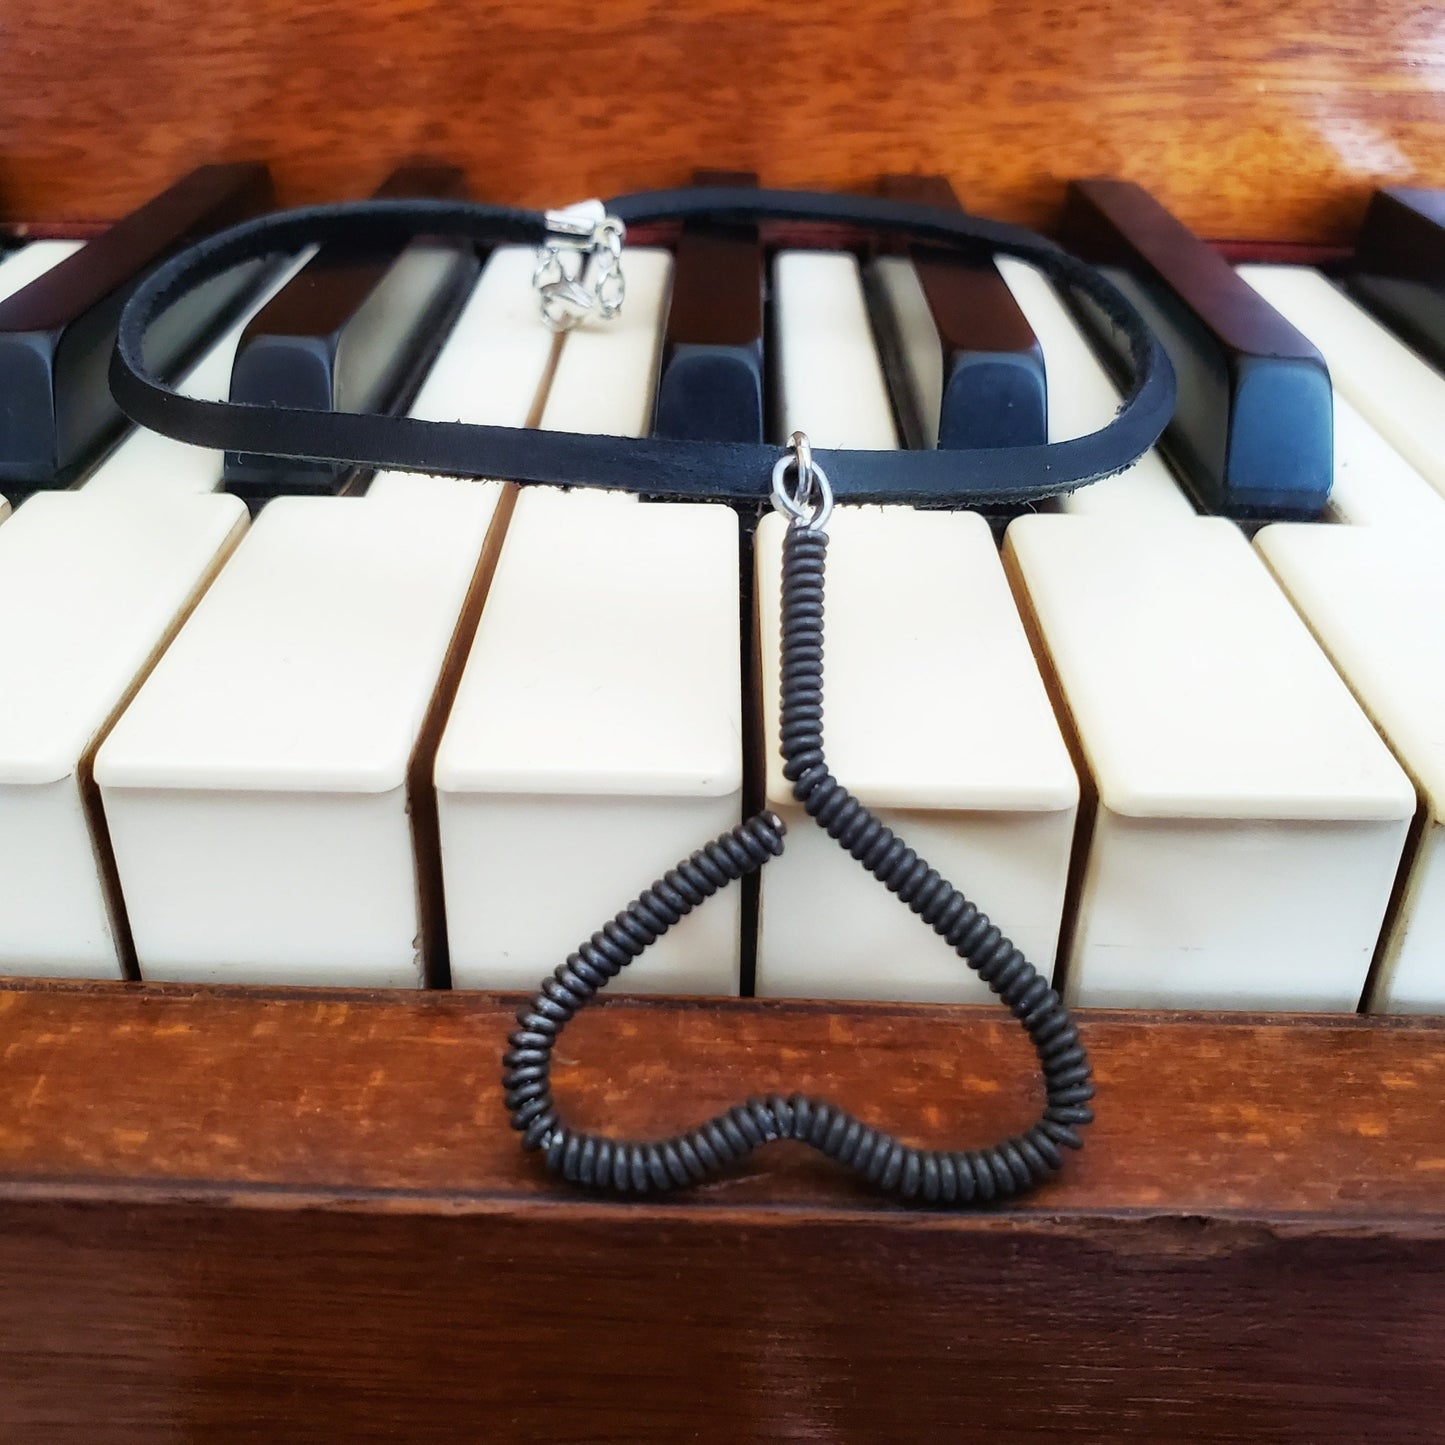 necklace - pendant is in the shape of an upside down heart and is made from a black upcycled piano string - pendant hangs off a black leather cord- necklace is lying on a piano keyboard